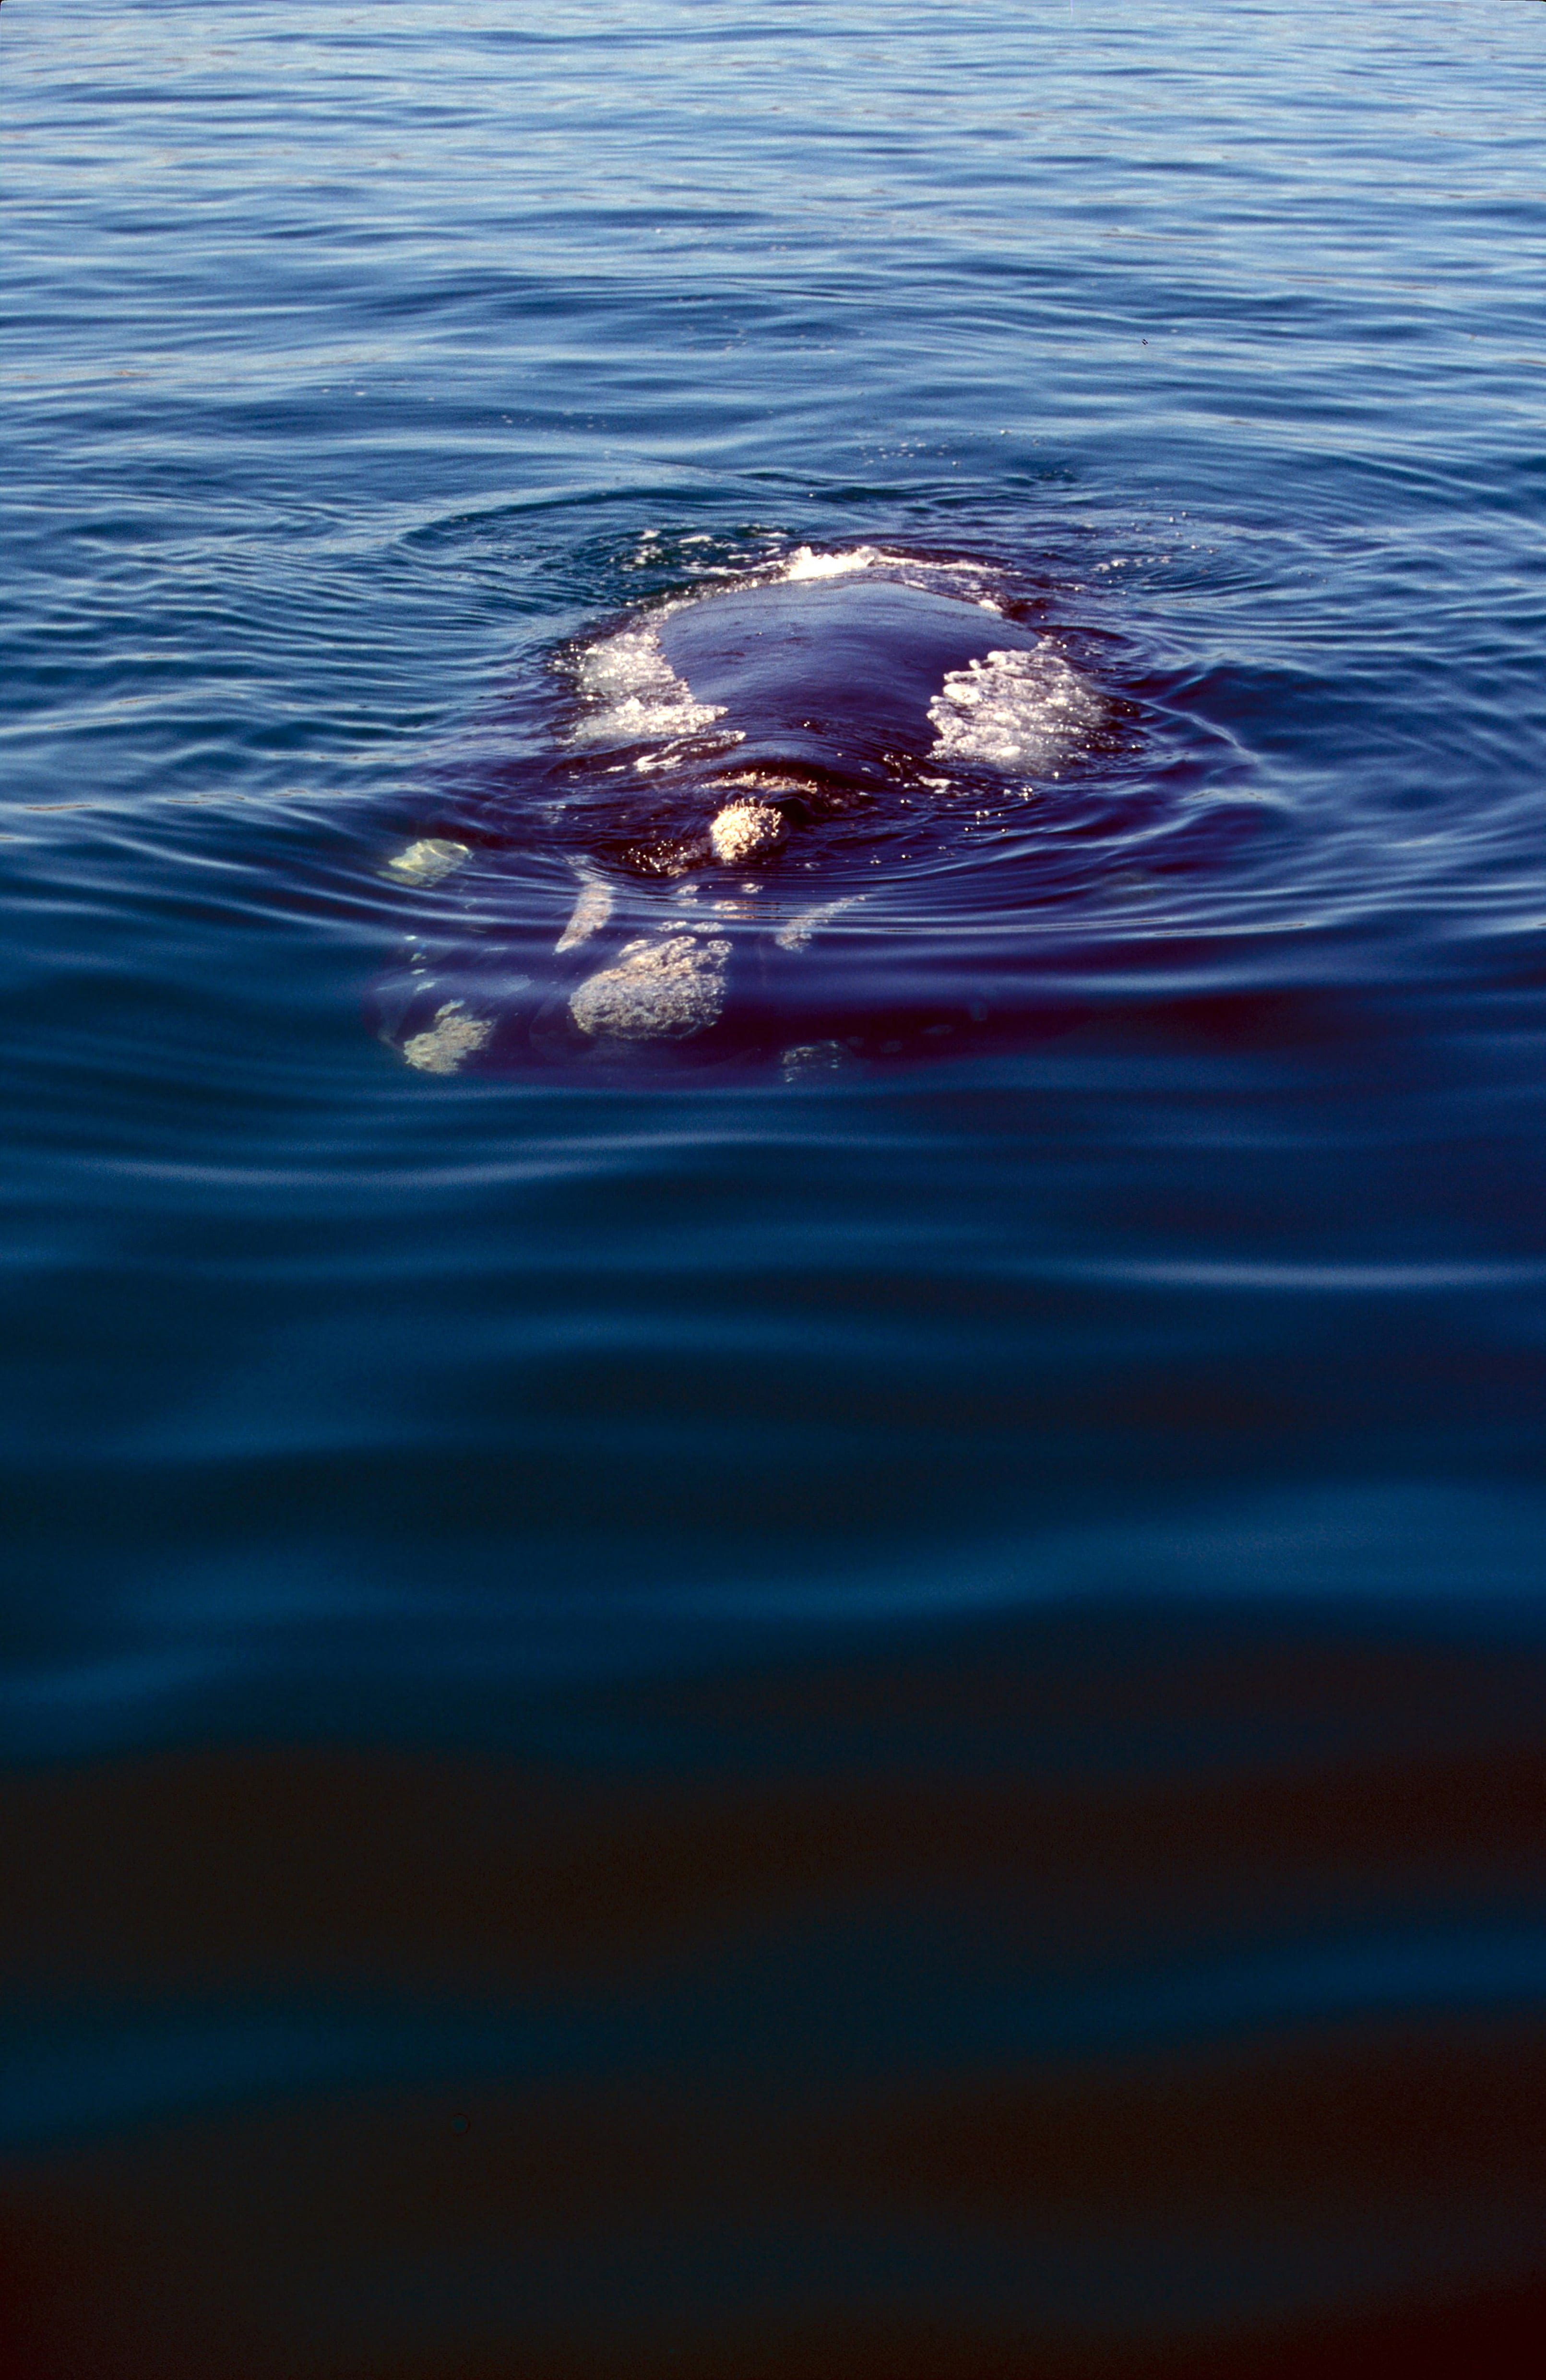 Southern Right Whale on the water surface (00011131)